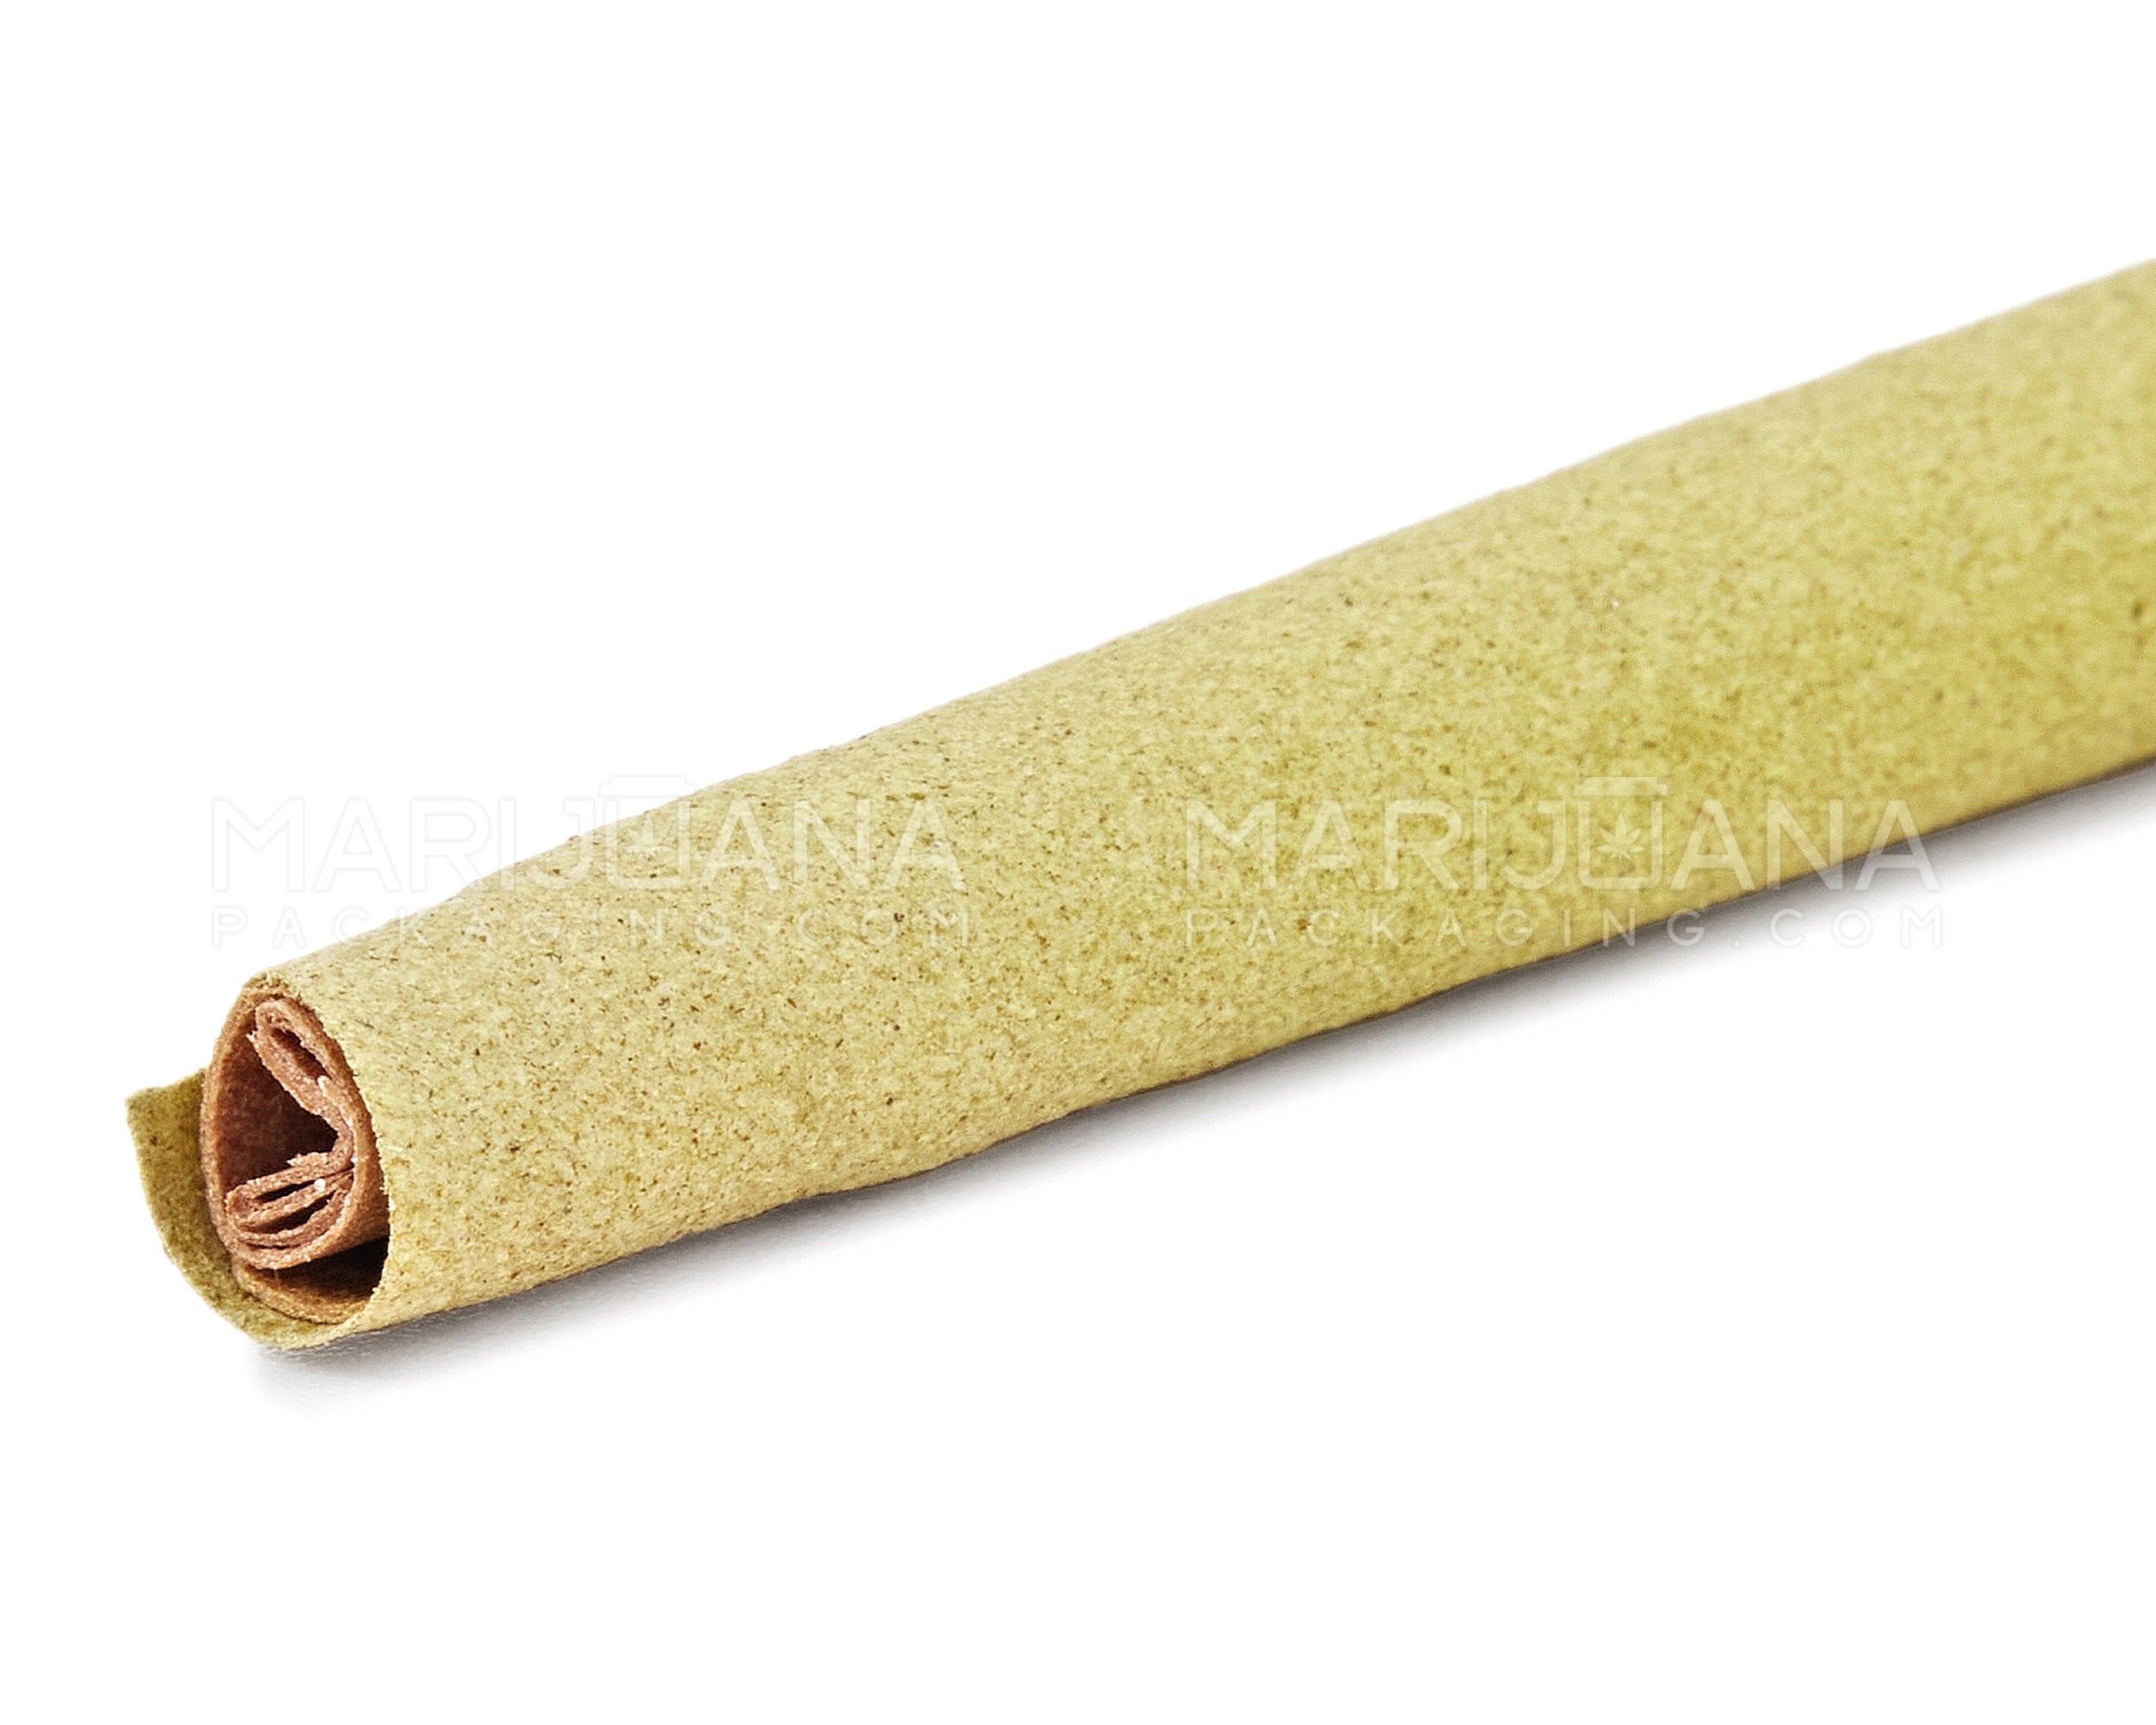 KUSH | 'Retail Display' Terpene Infused Herbal Conical Wraps | 160mm - Berry Gelato - 12 Count - 8